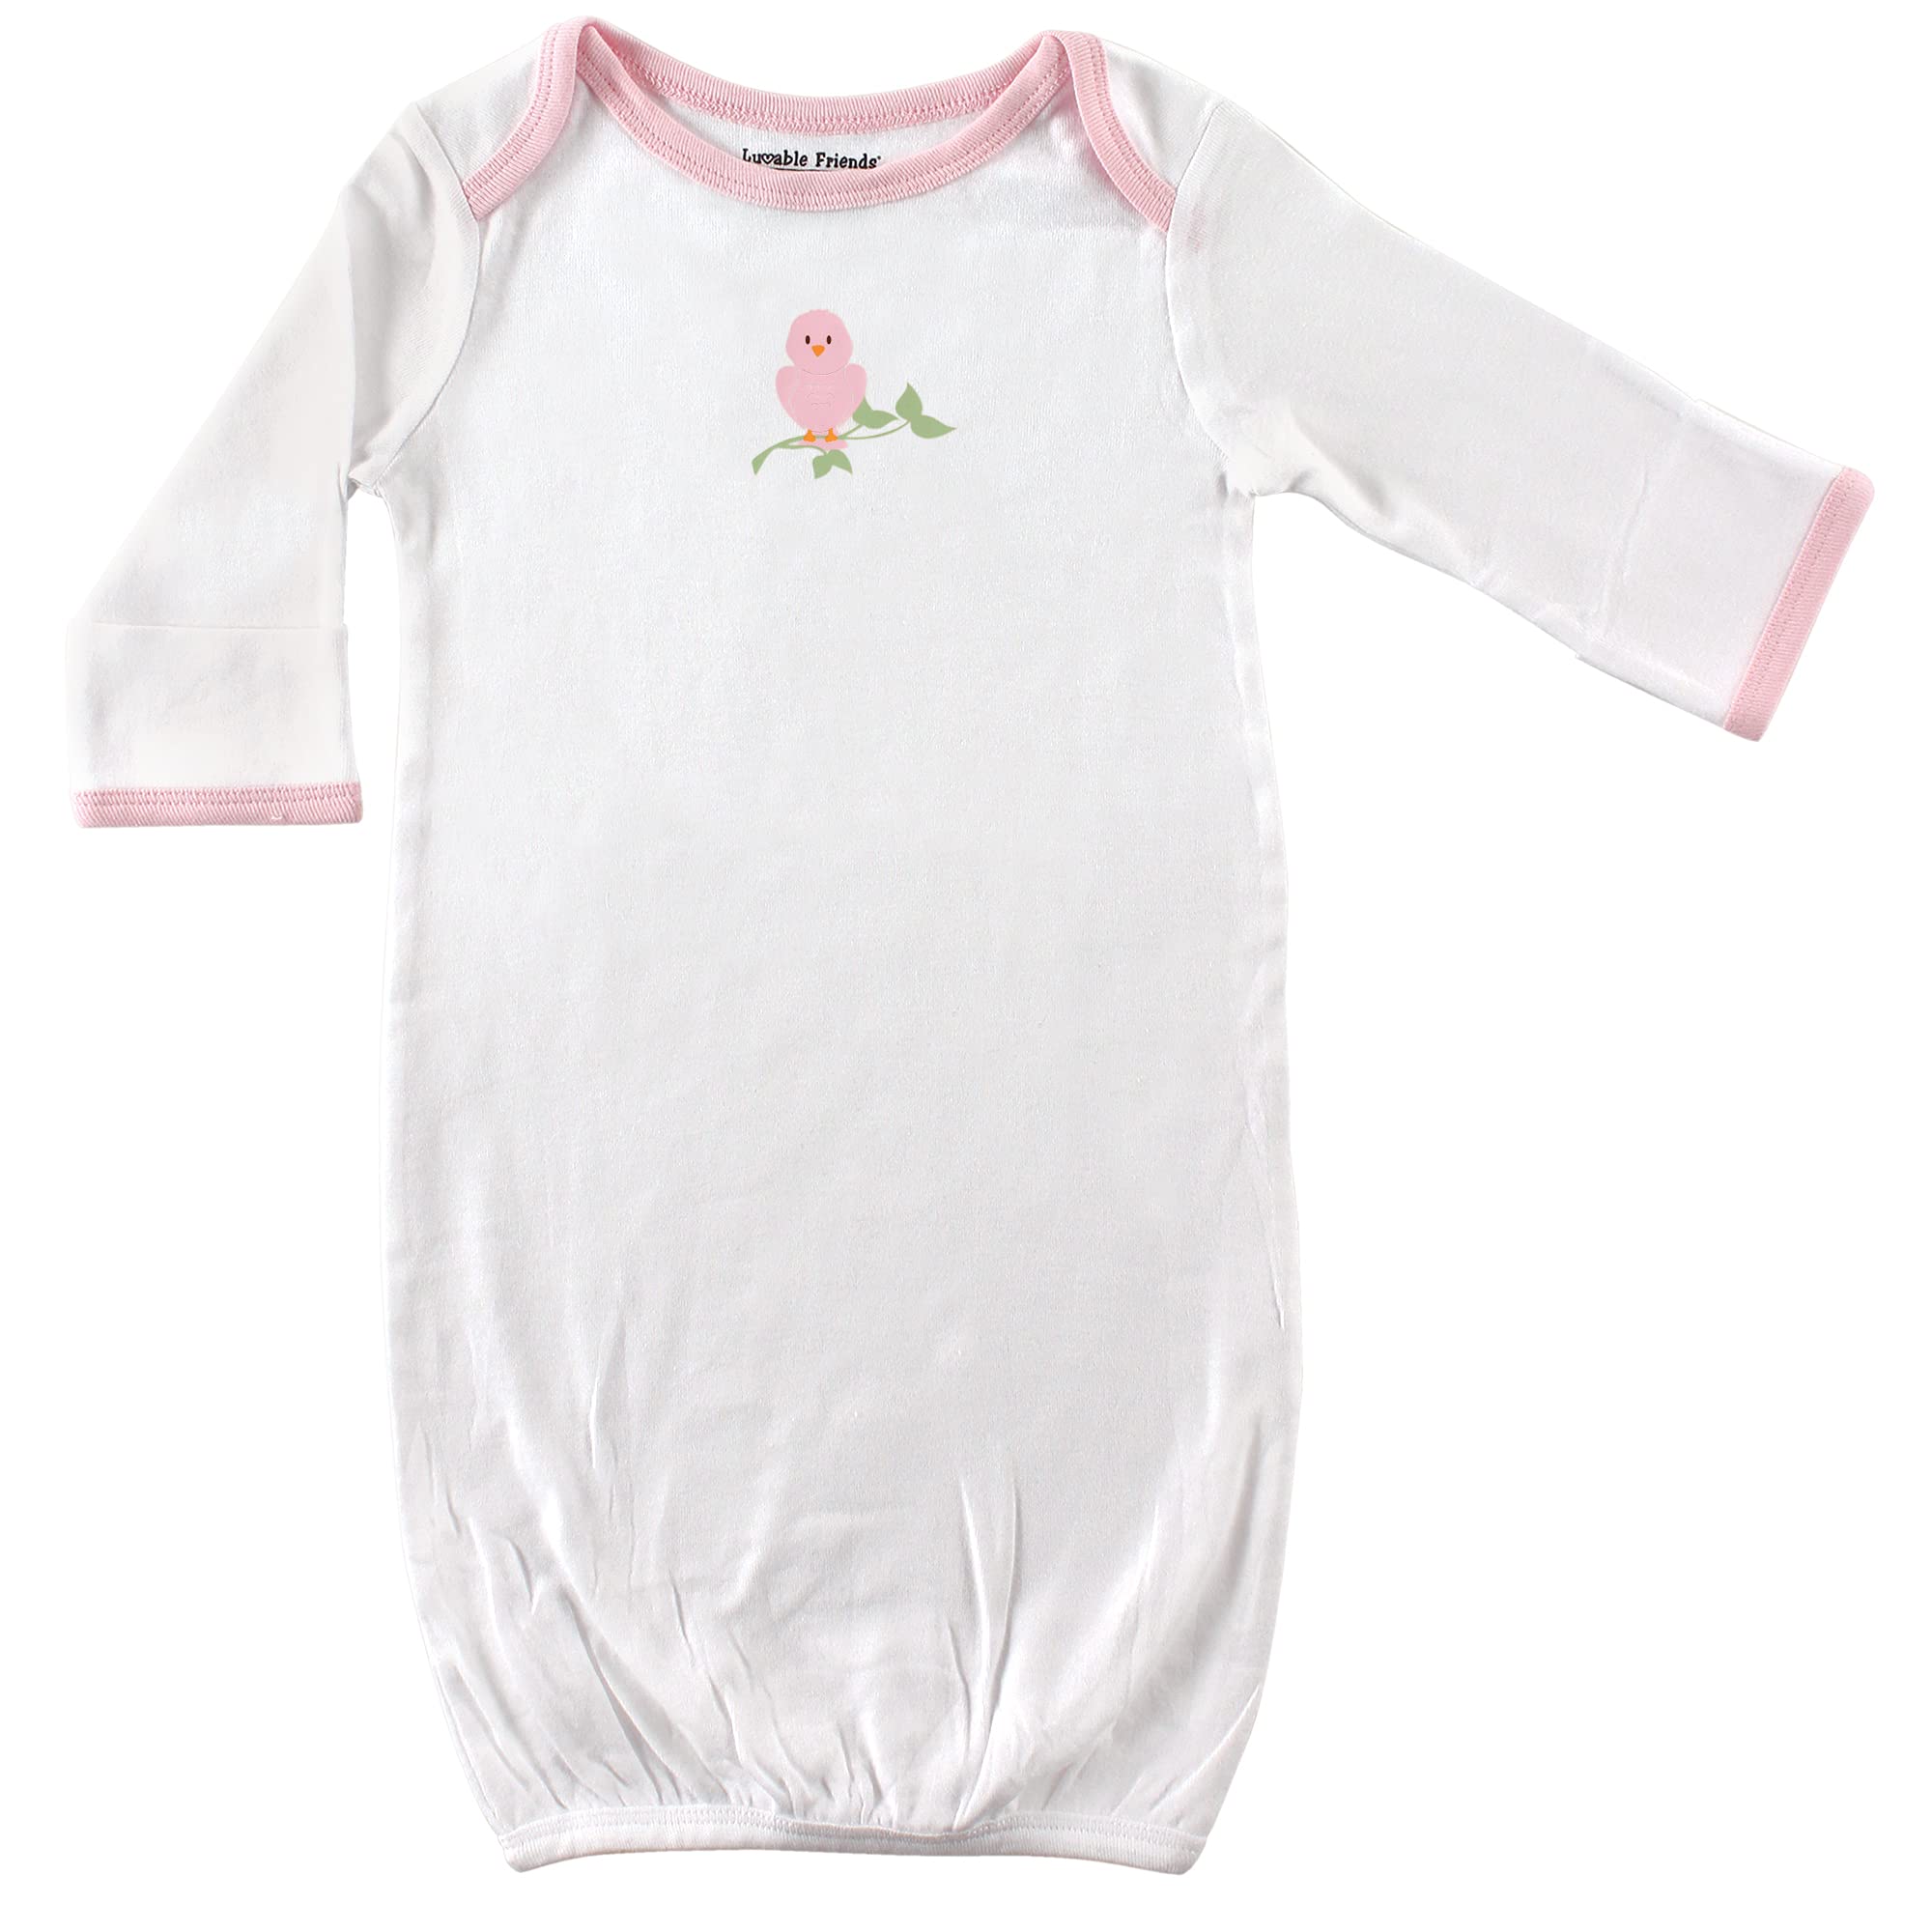 Luvable Friends Baby Girls' Cotton Gowns